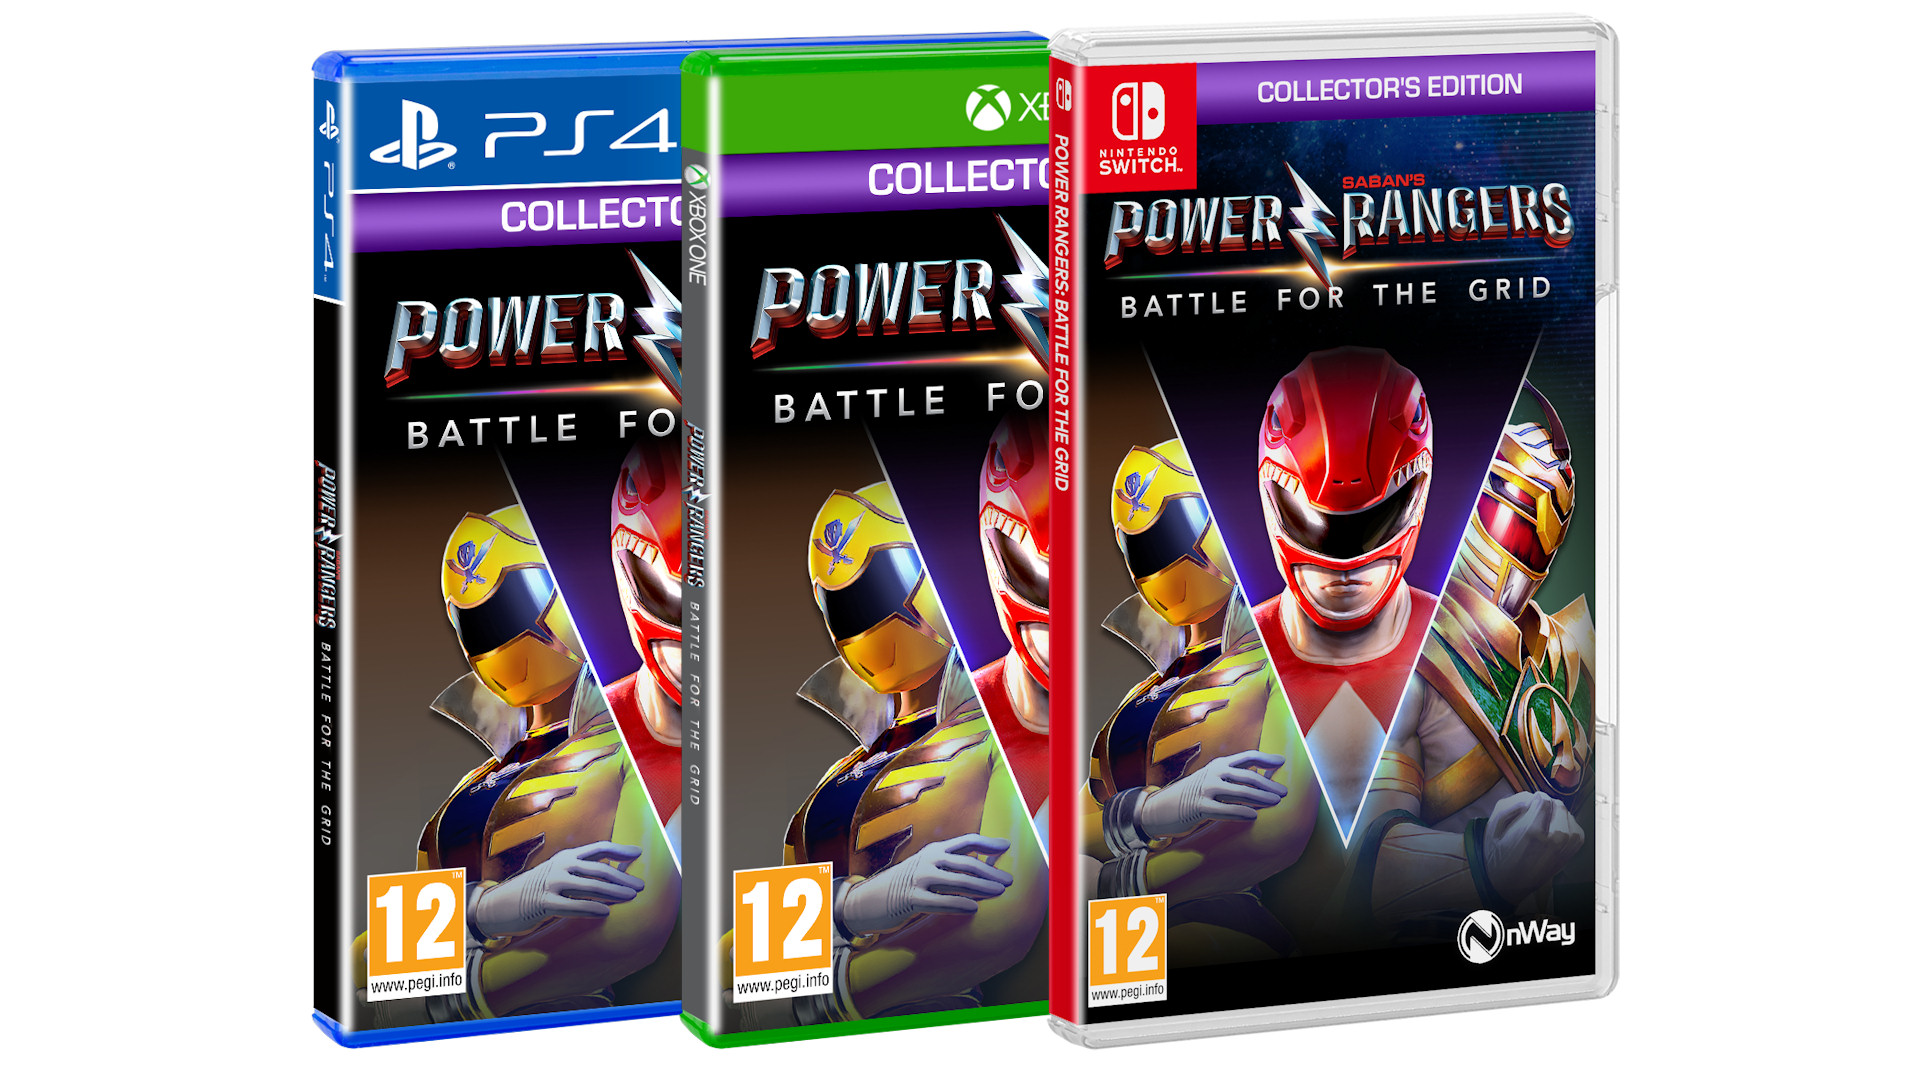 Power Rangers: Battle for the Grid - Collector's Edition